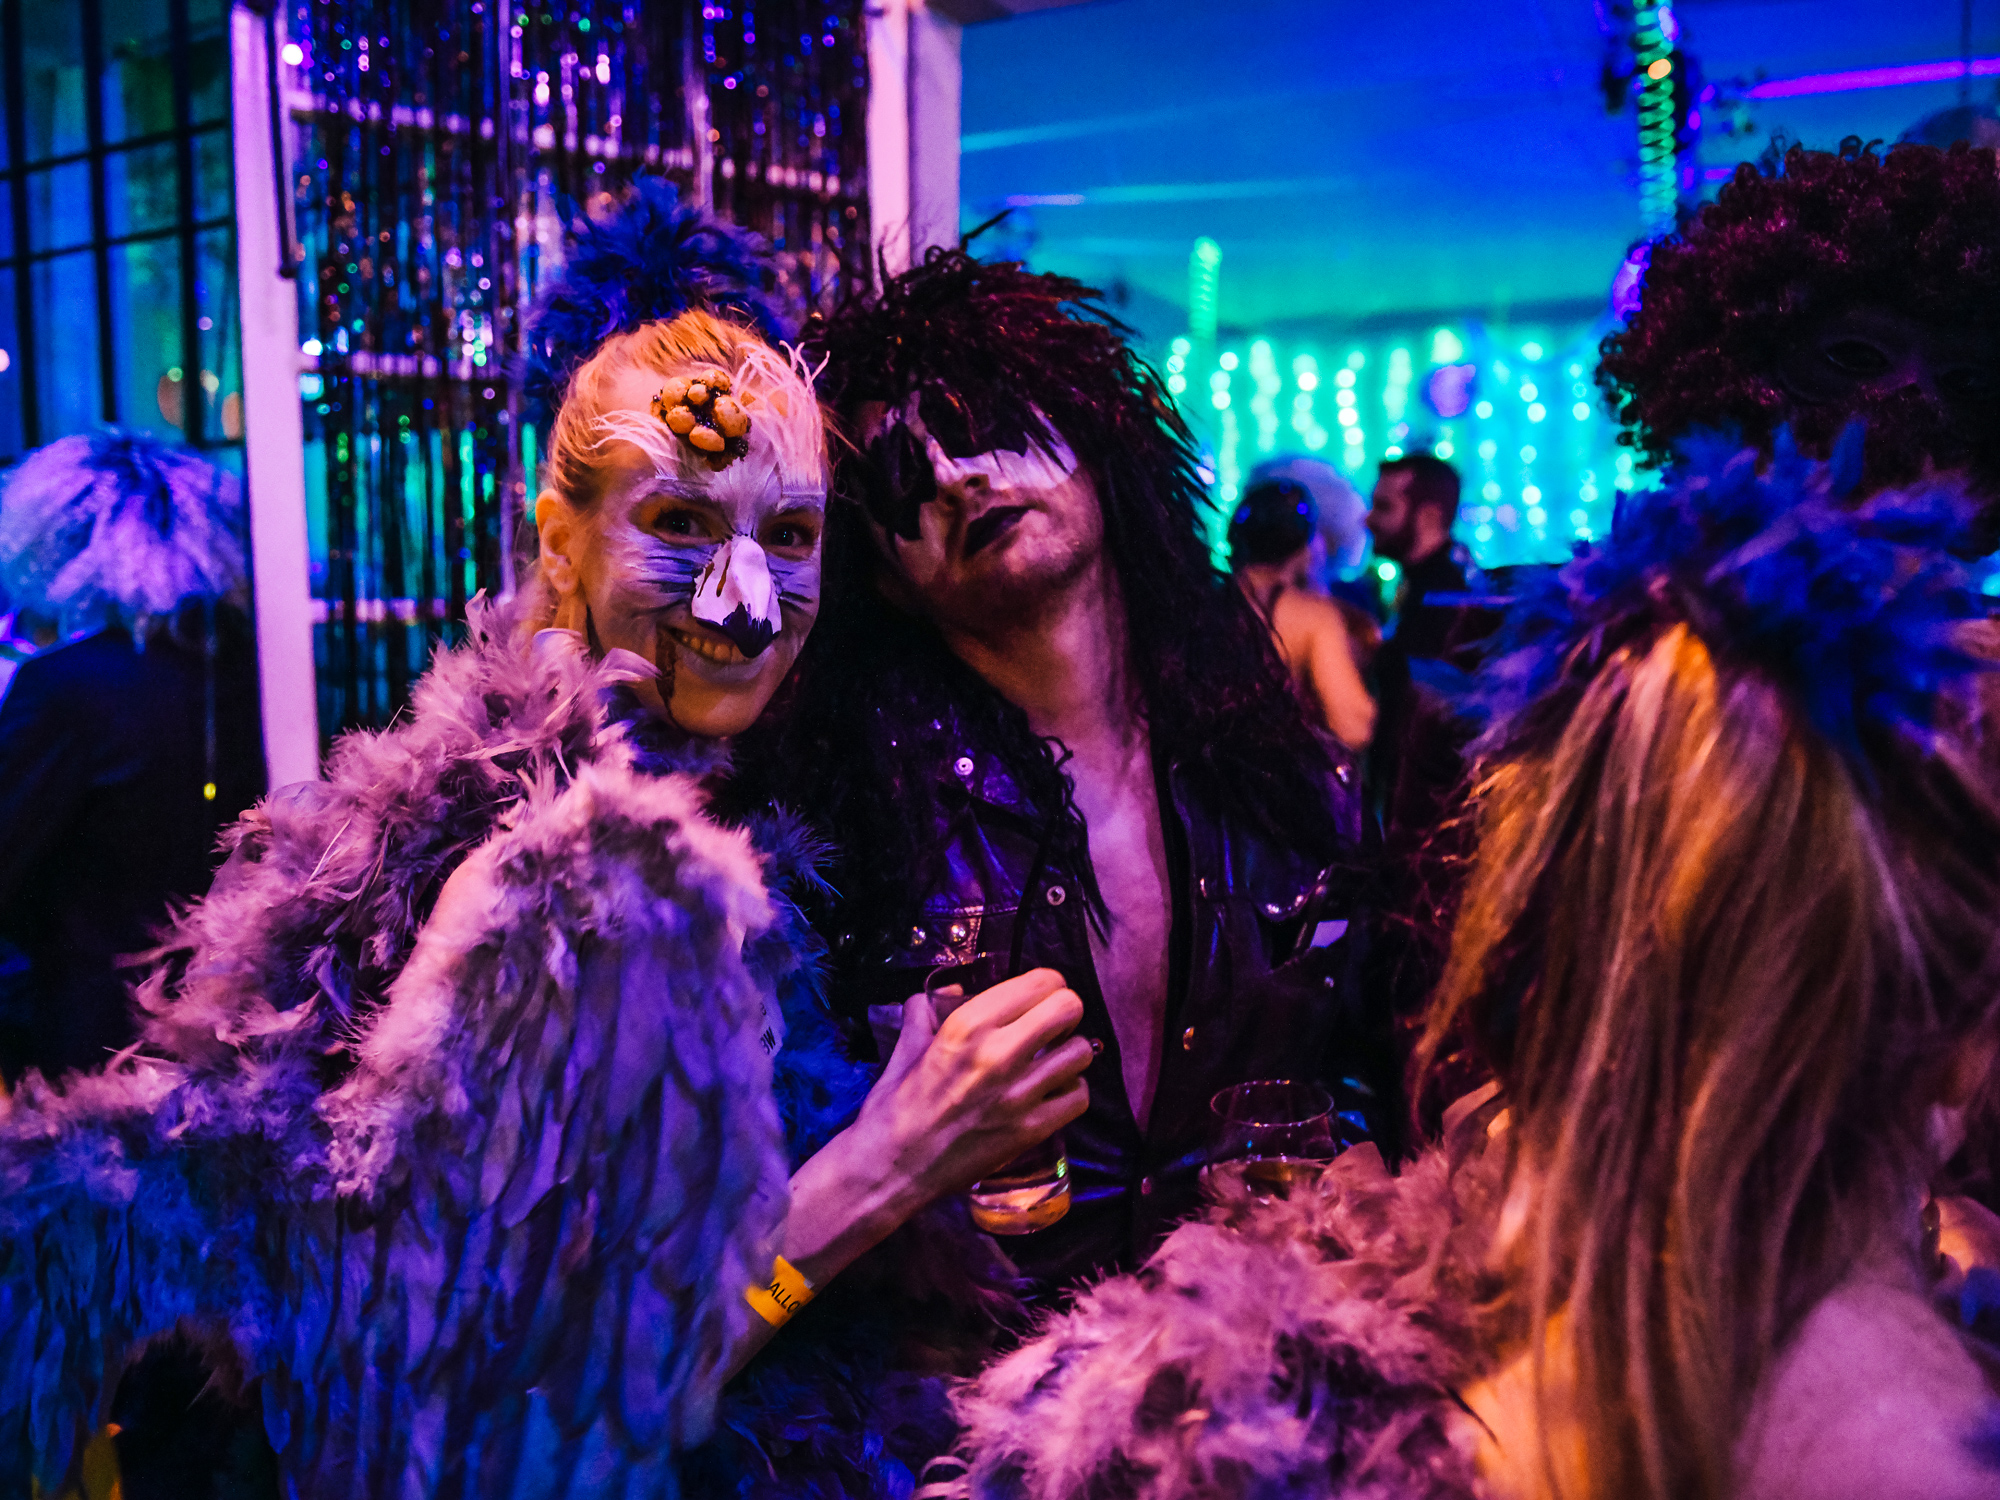 Party-goers in elaborate costumes with feathers and skull makeup, sharing a moment of laughter.